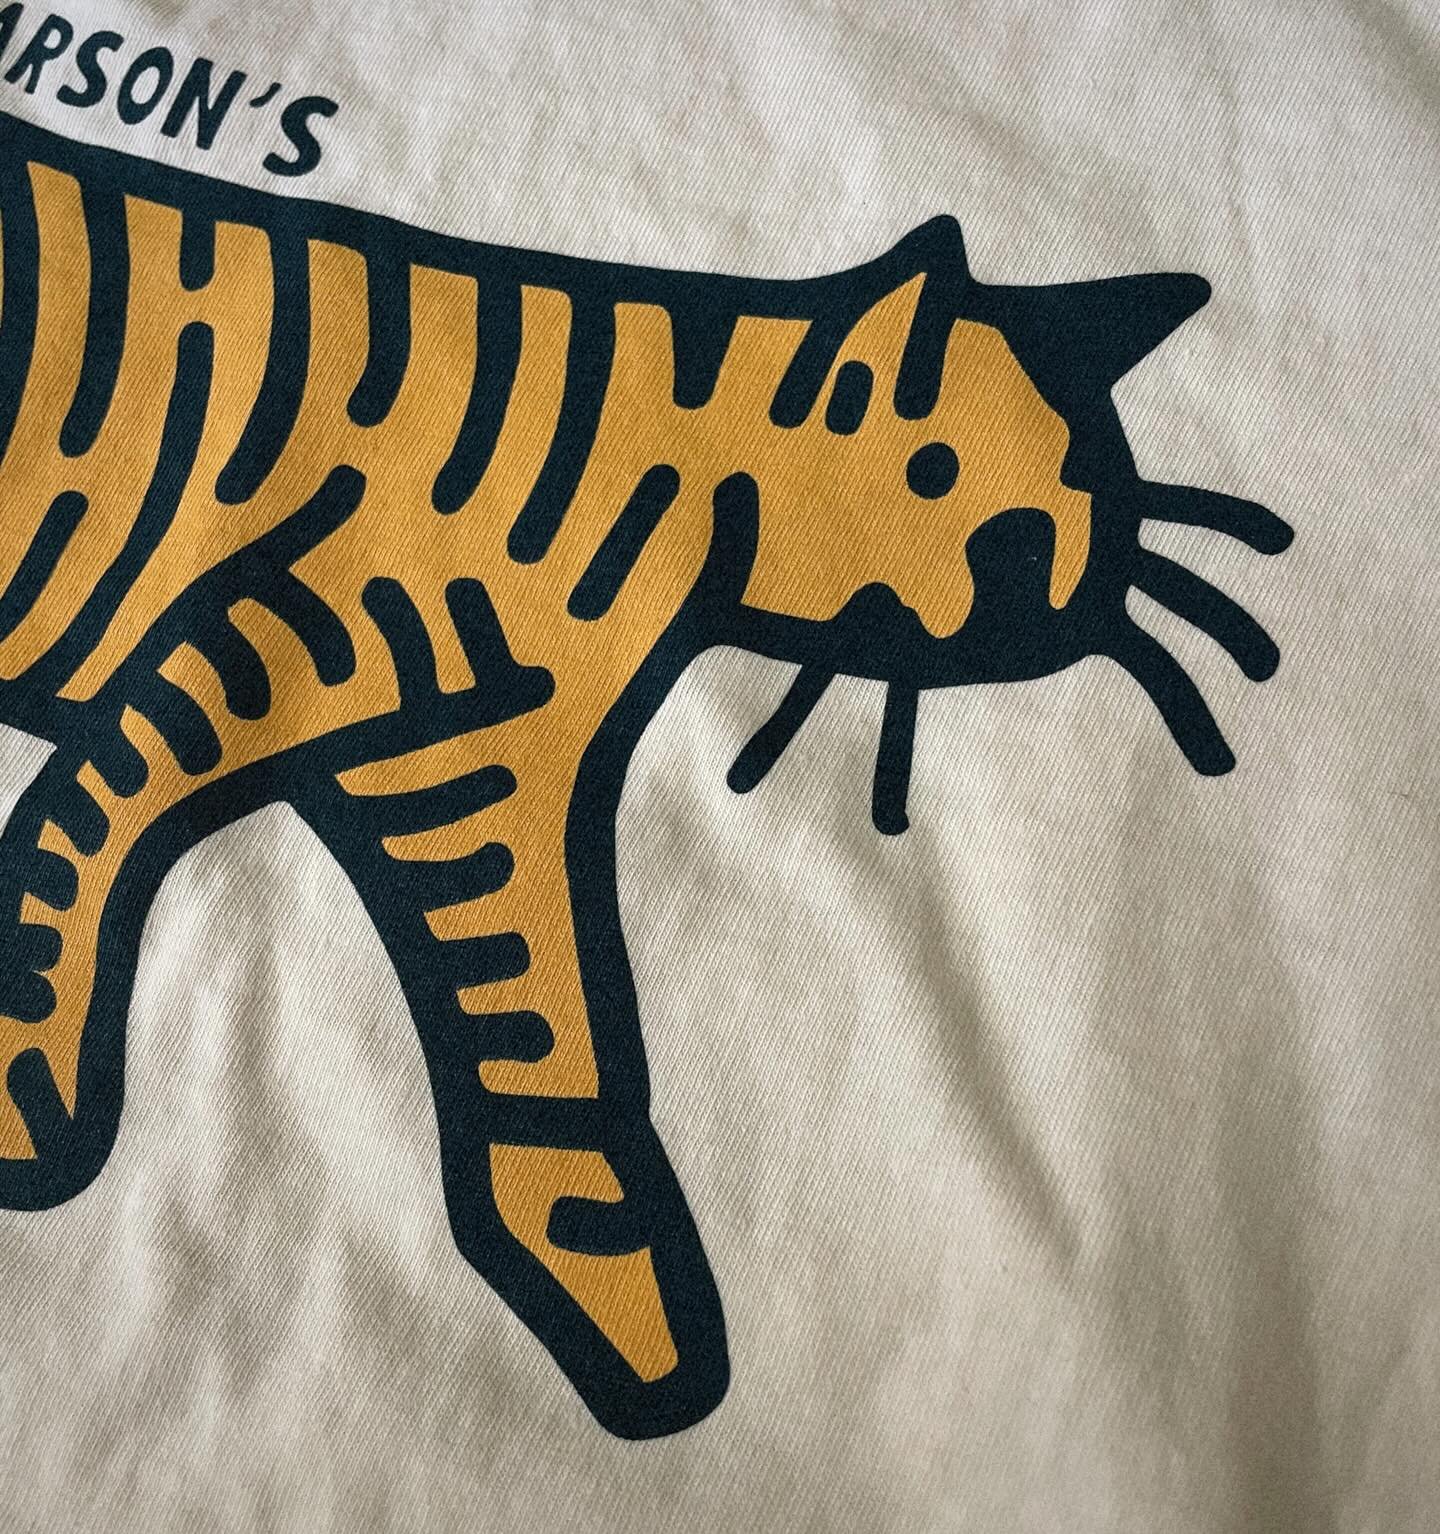 meow!

pearson&rsquo;s tees are here &lt;3